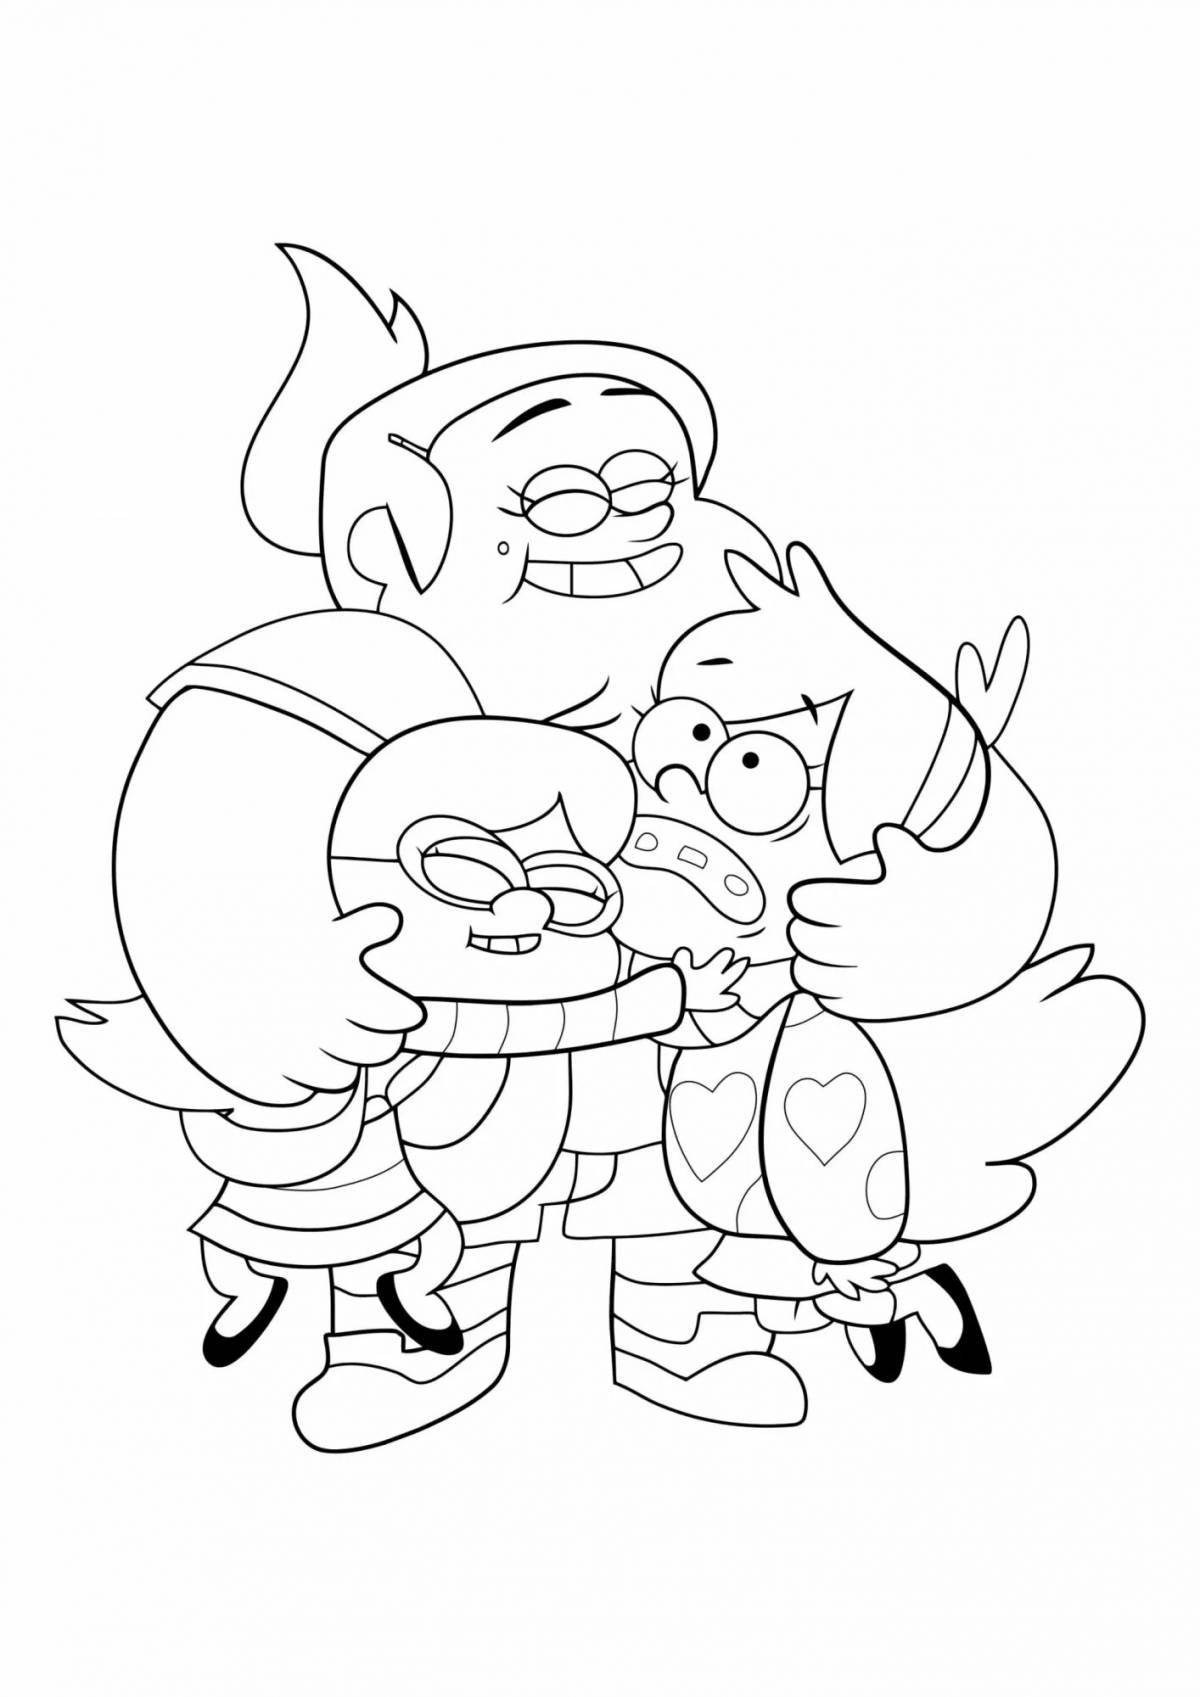 Glowing gravity falls coloring page